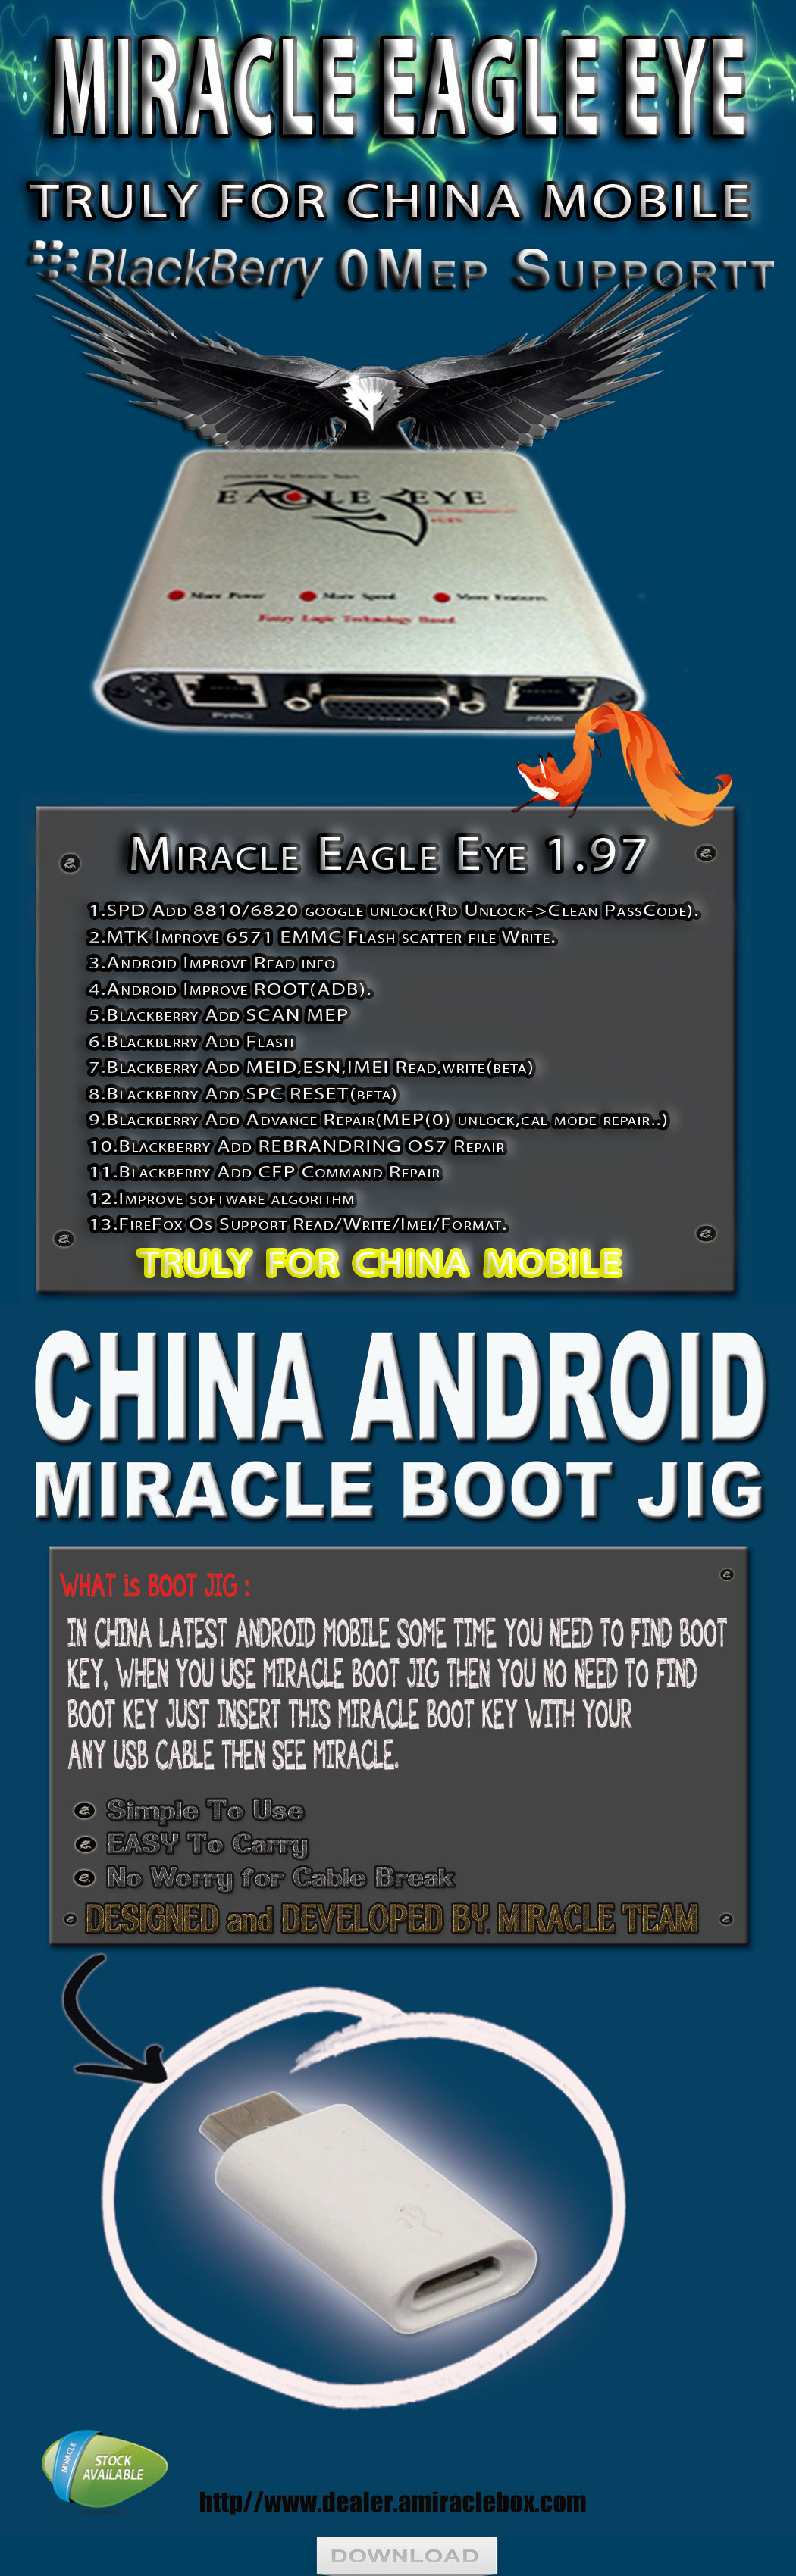 Miracle Eagle Eye Box 1.97 12 Dec Advance MerryChristmas(Blackberry 0Mep)FireFox Also Miracle-eagle197